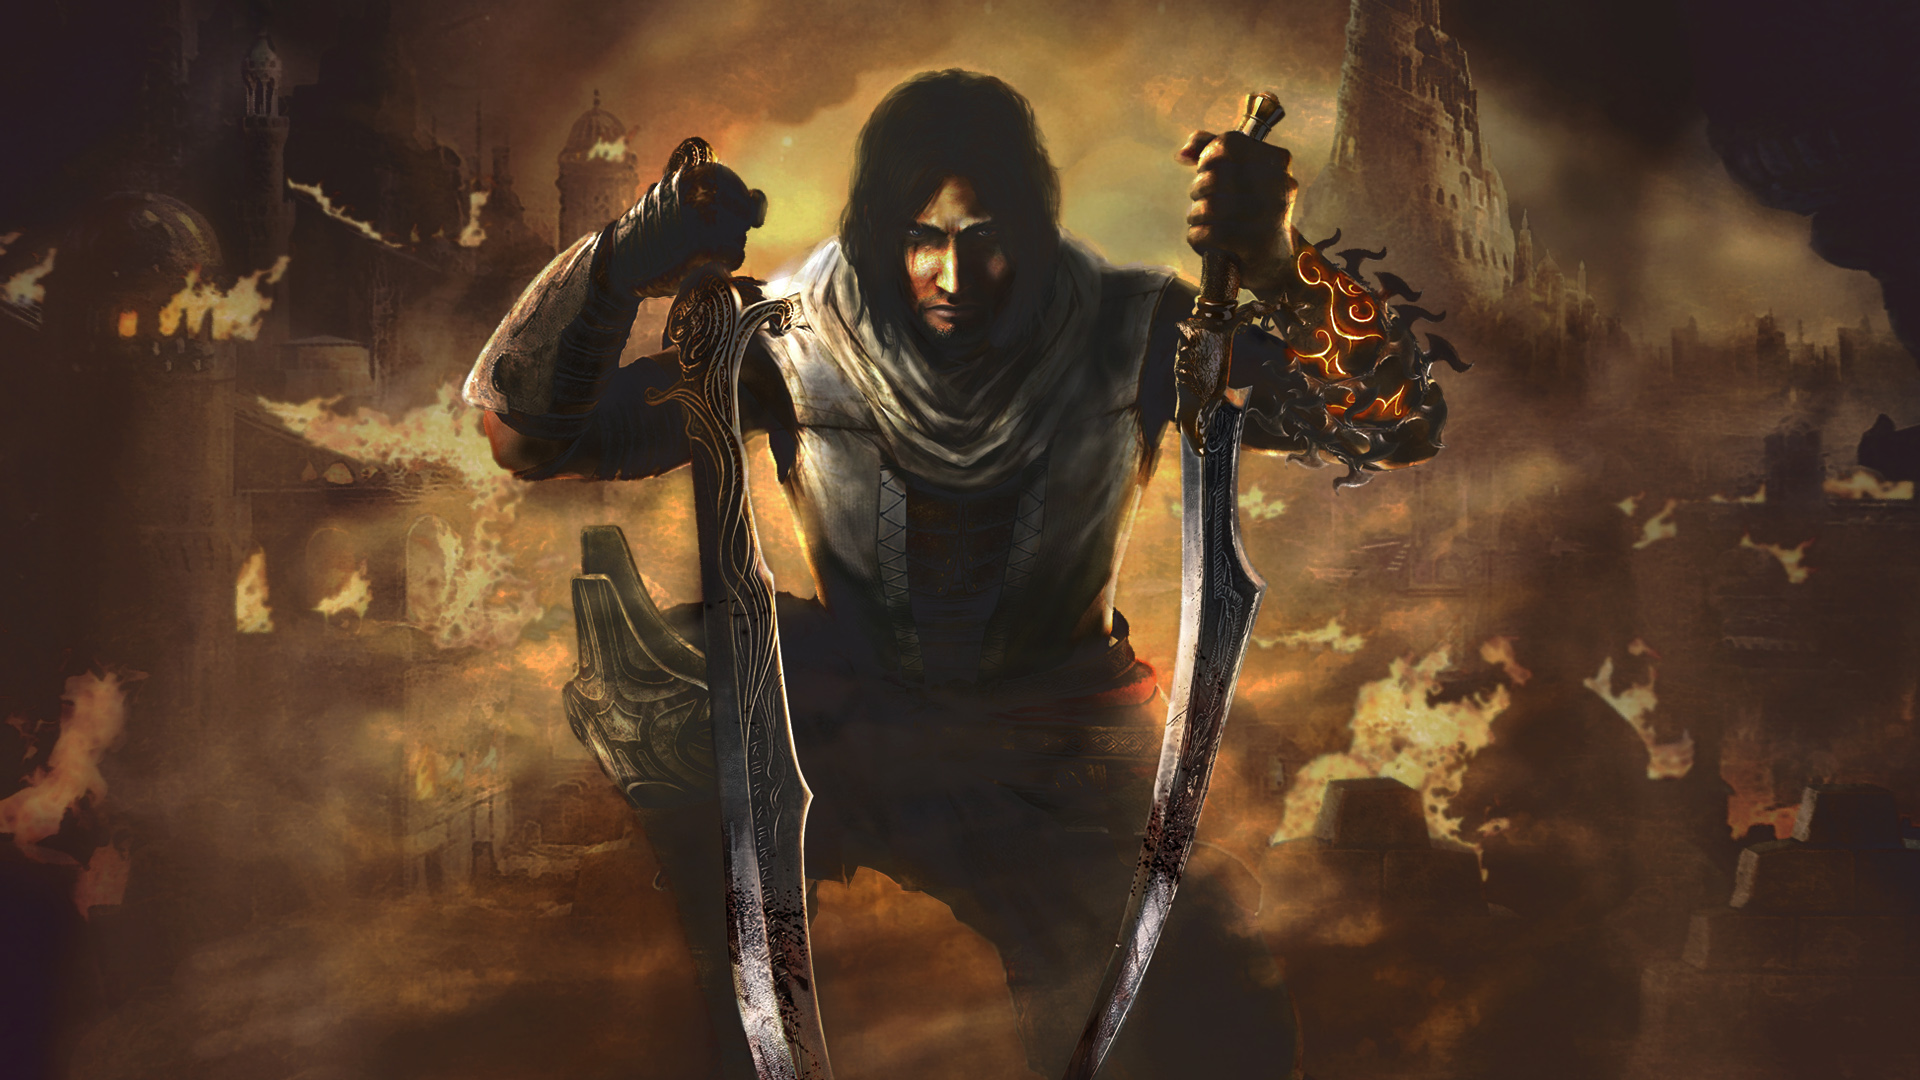 39 Prince Of Persia HD Wallpapers | Backgrounds - Wallpaper Abyss